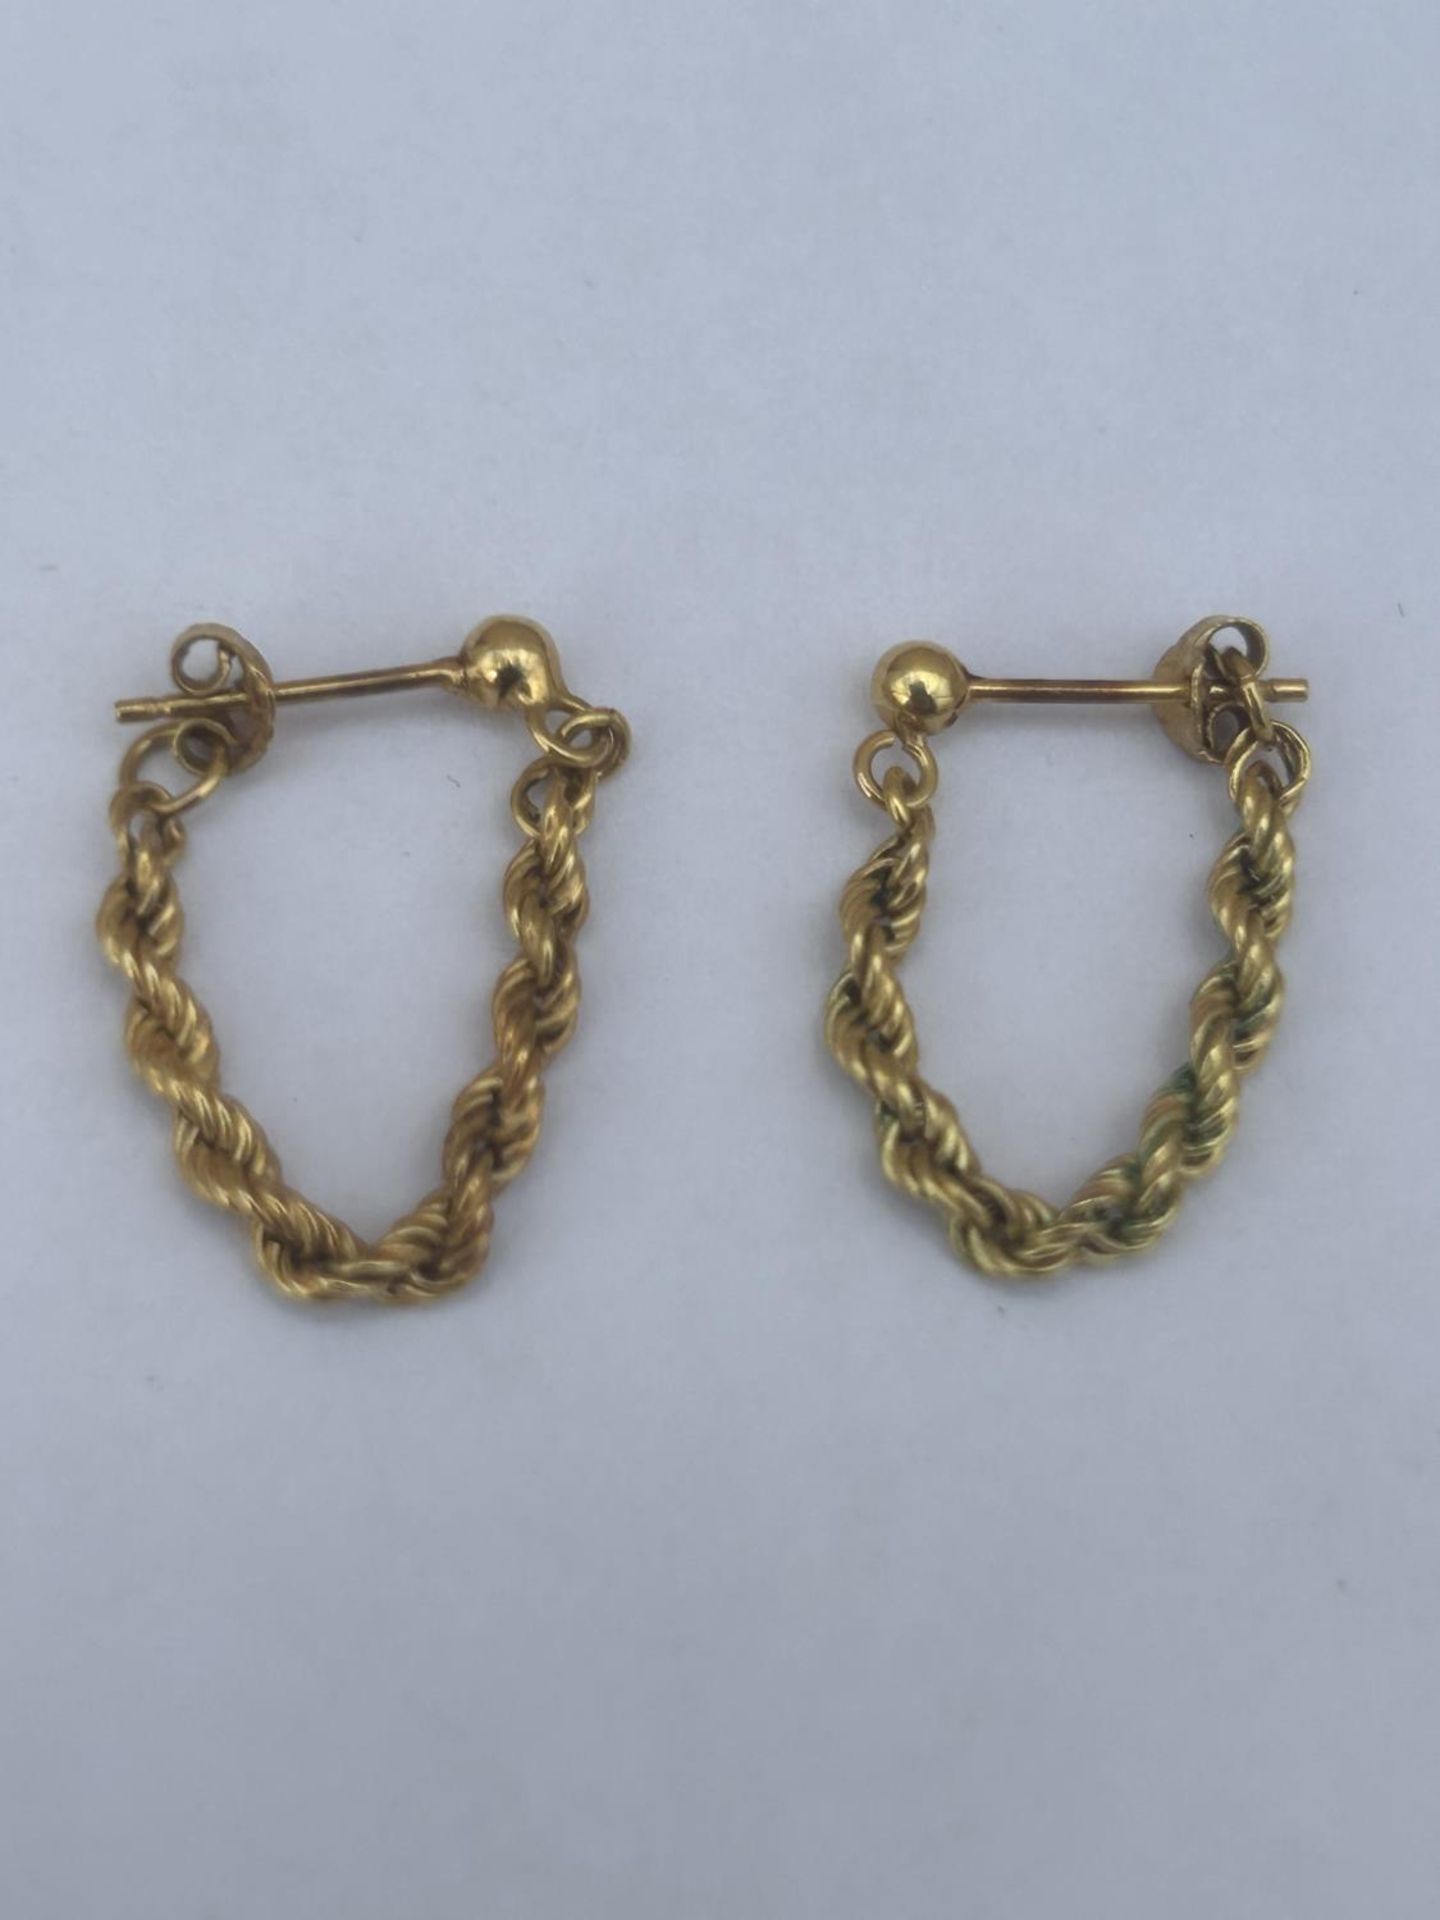 A PAIR OF 9CT GOLD ROPE TWIST EARRINGS, WEIGHT 1.1 G